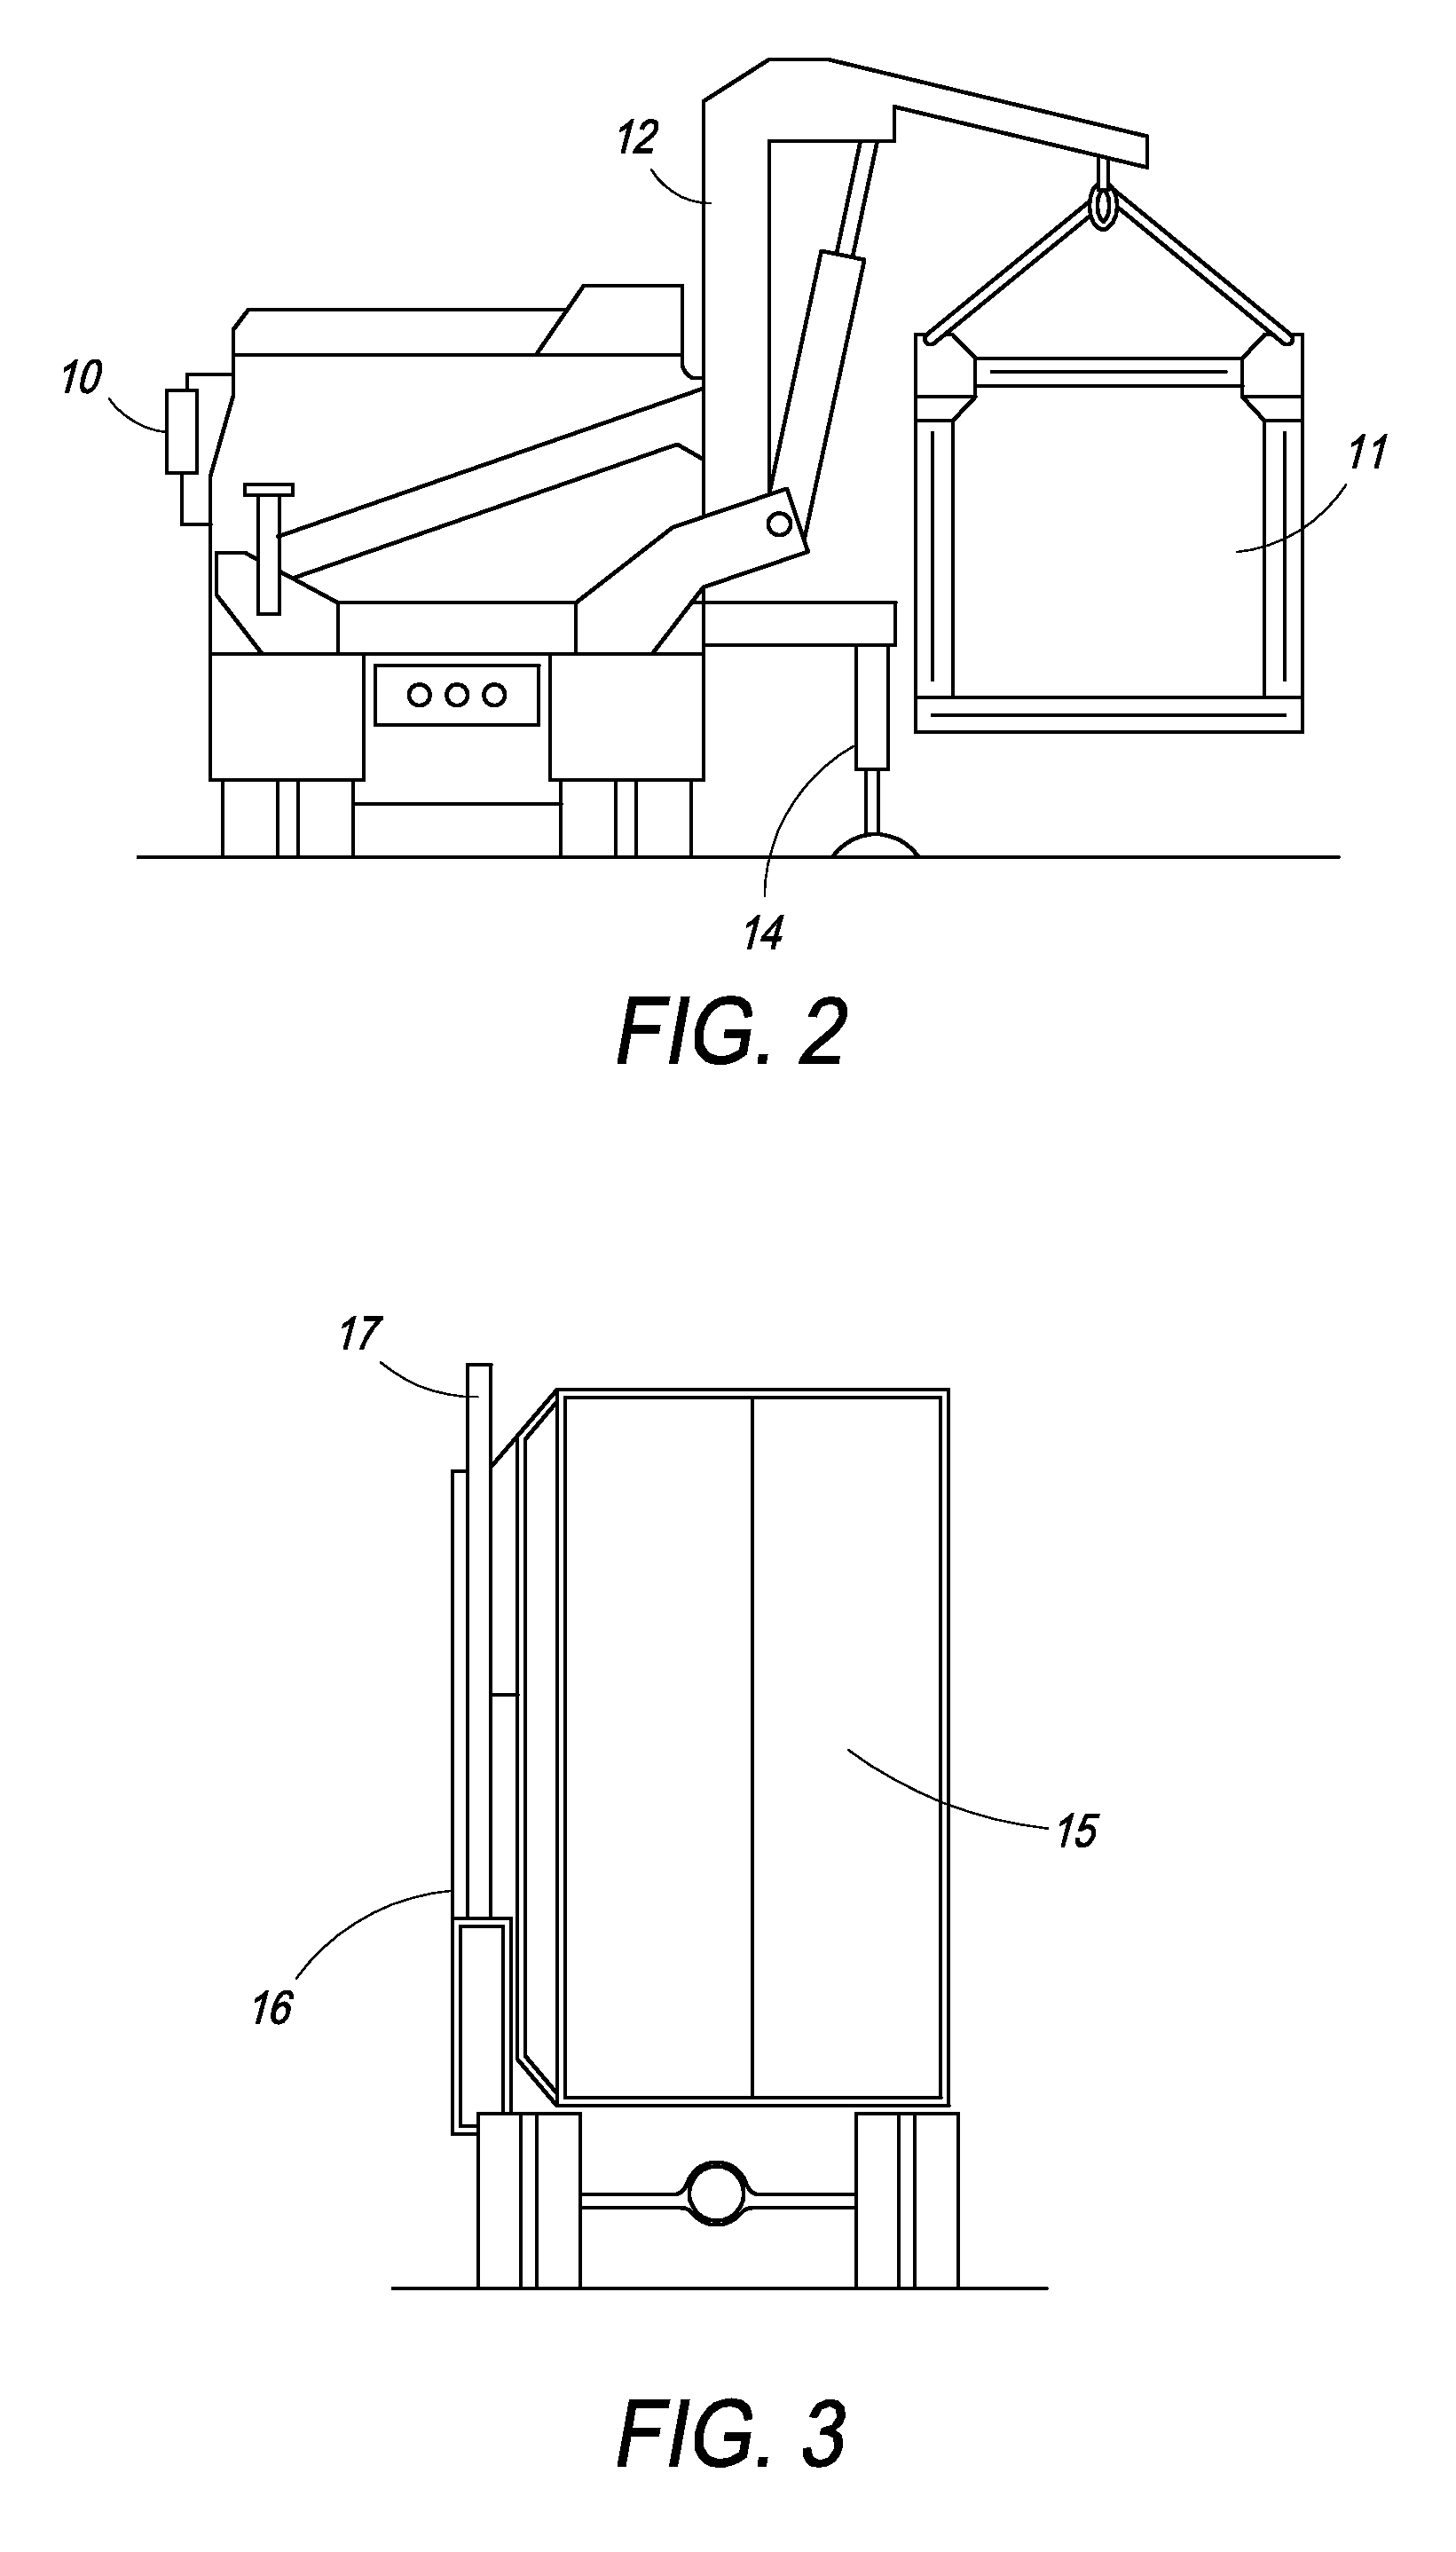 Self-Contained Mobile Inspection System and Method